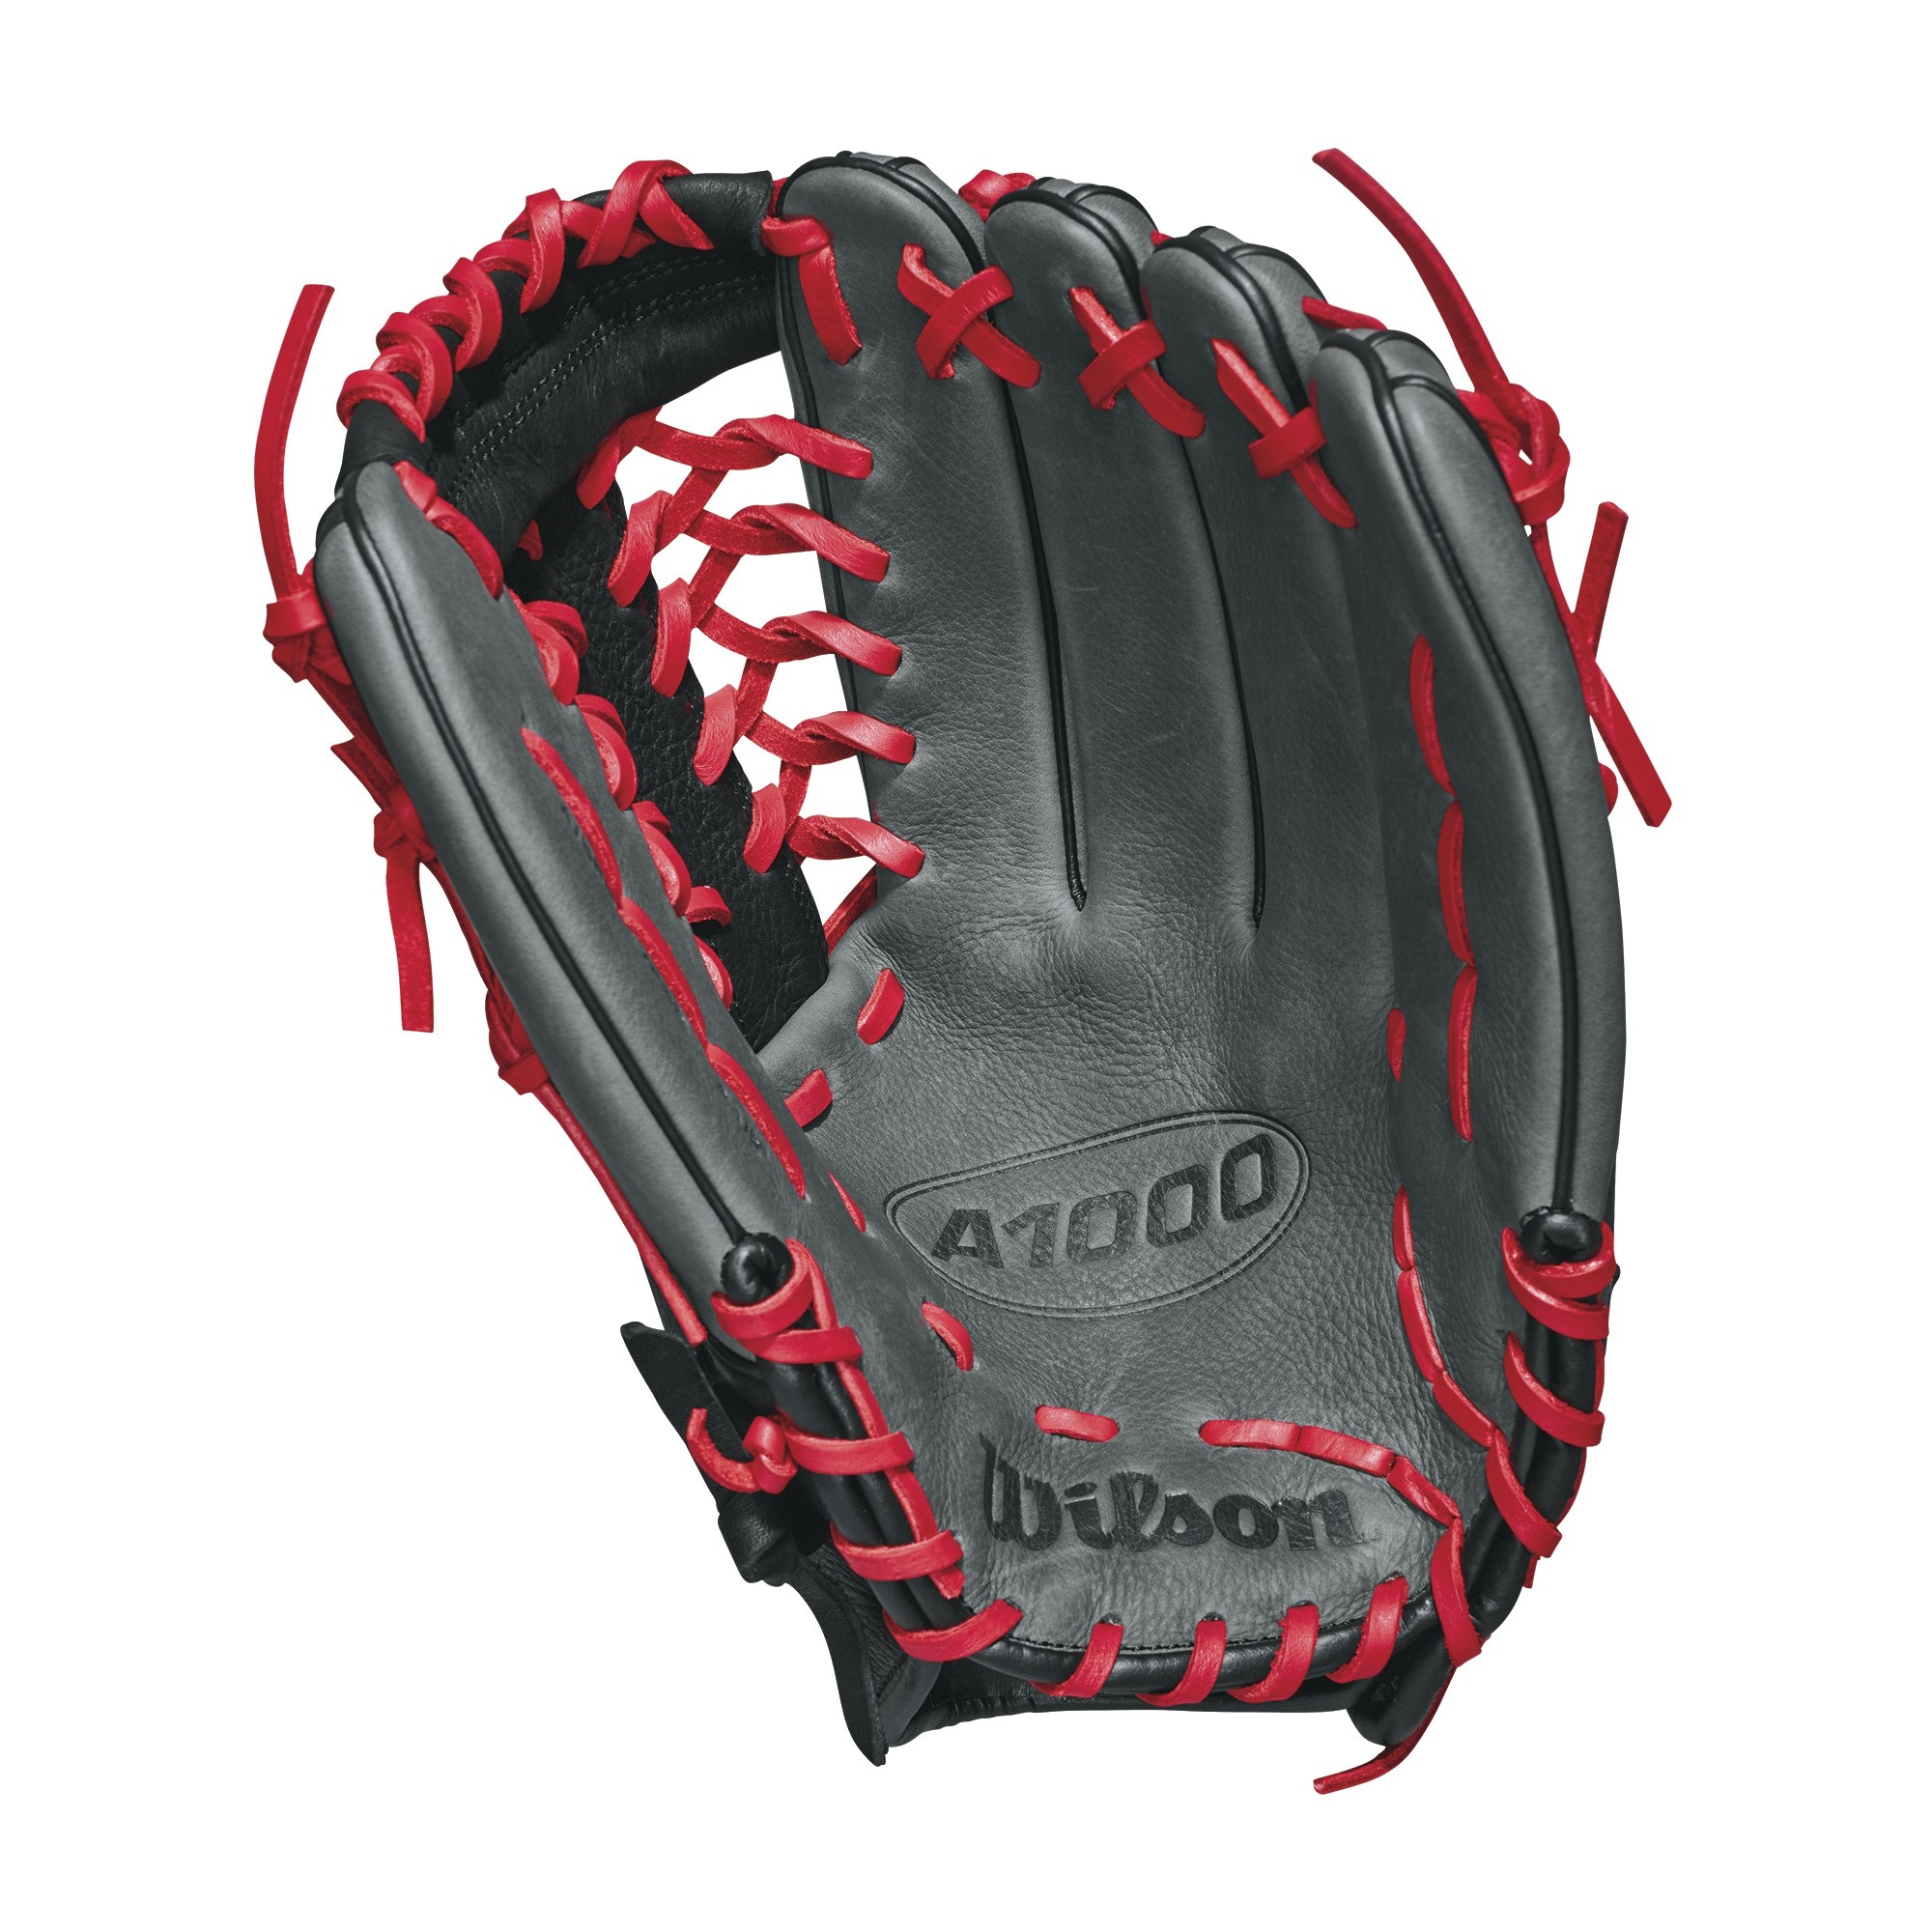 Wilson A1000 Series 12.5" Outfield Baseball Glove, Right Hand Throw - image 2 of 3